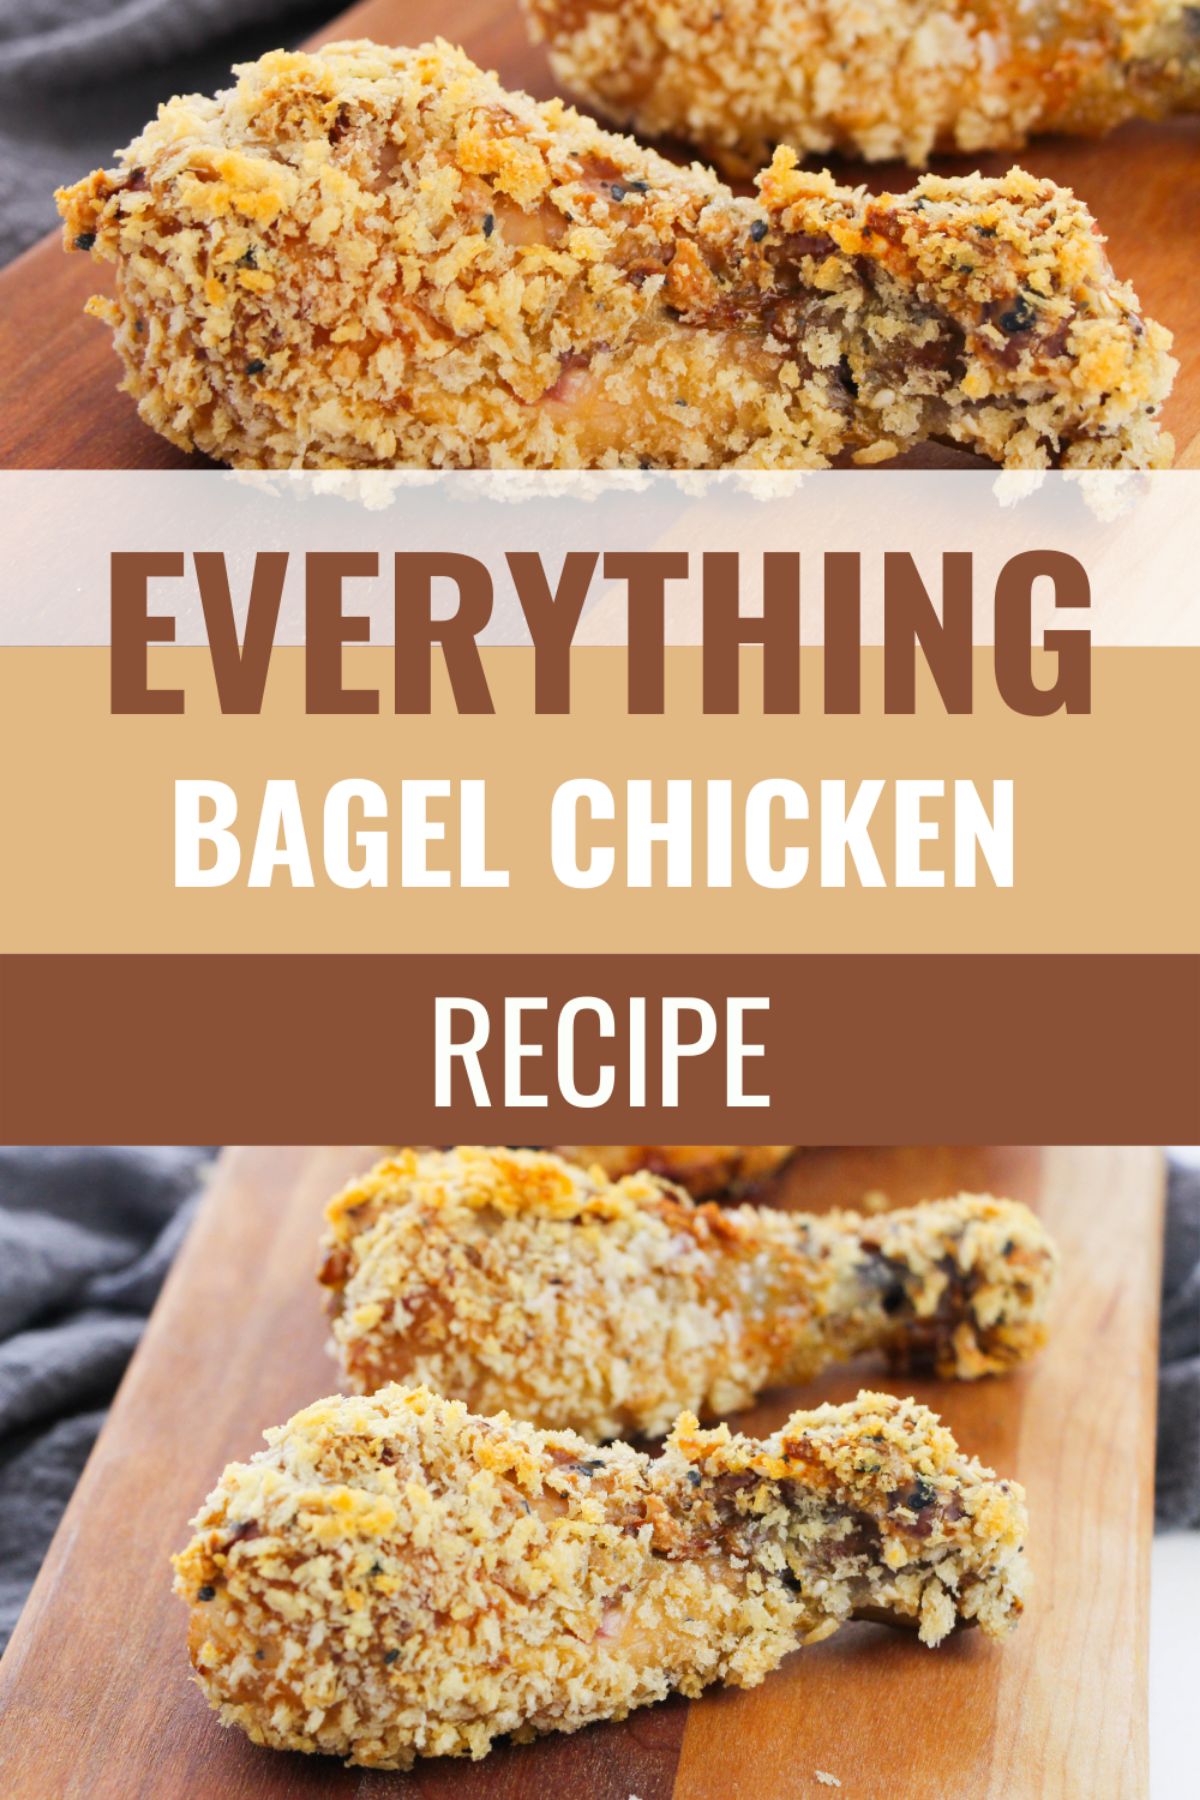 Everything Bagel Chicken is a delicious twist on the usual chicken recipe. It's a simple and quick dish that costs little to make. #everythingbagelchicken #everythingbagel #chicken #chickendinner #recipe via @wondermomwannab